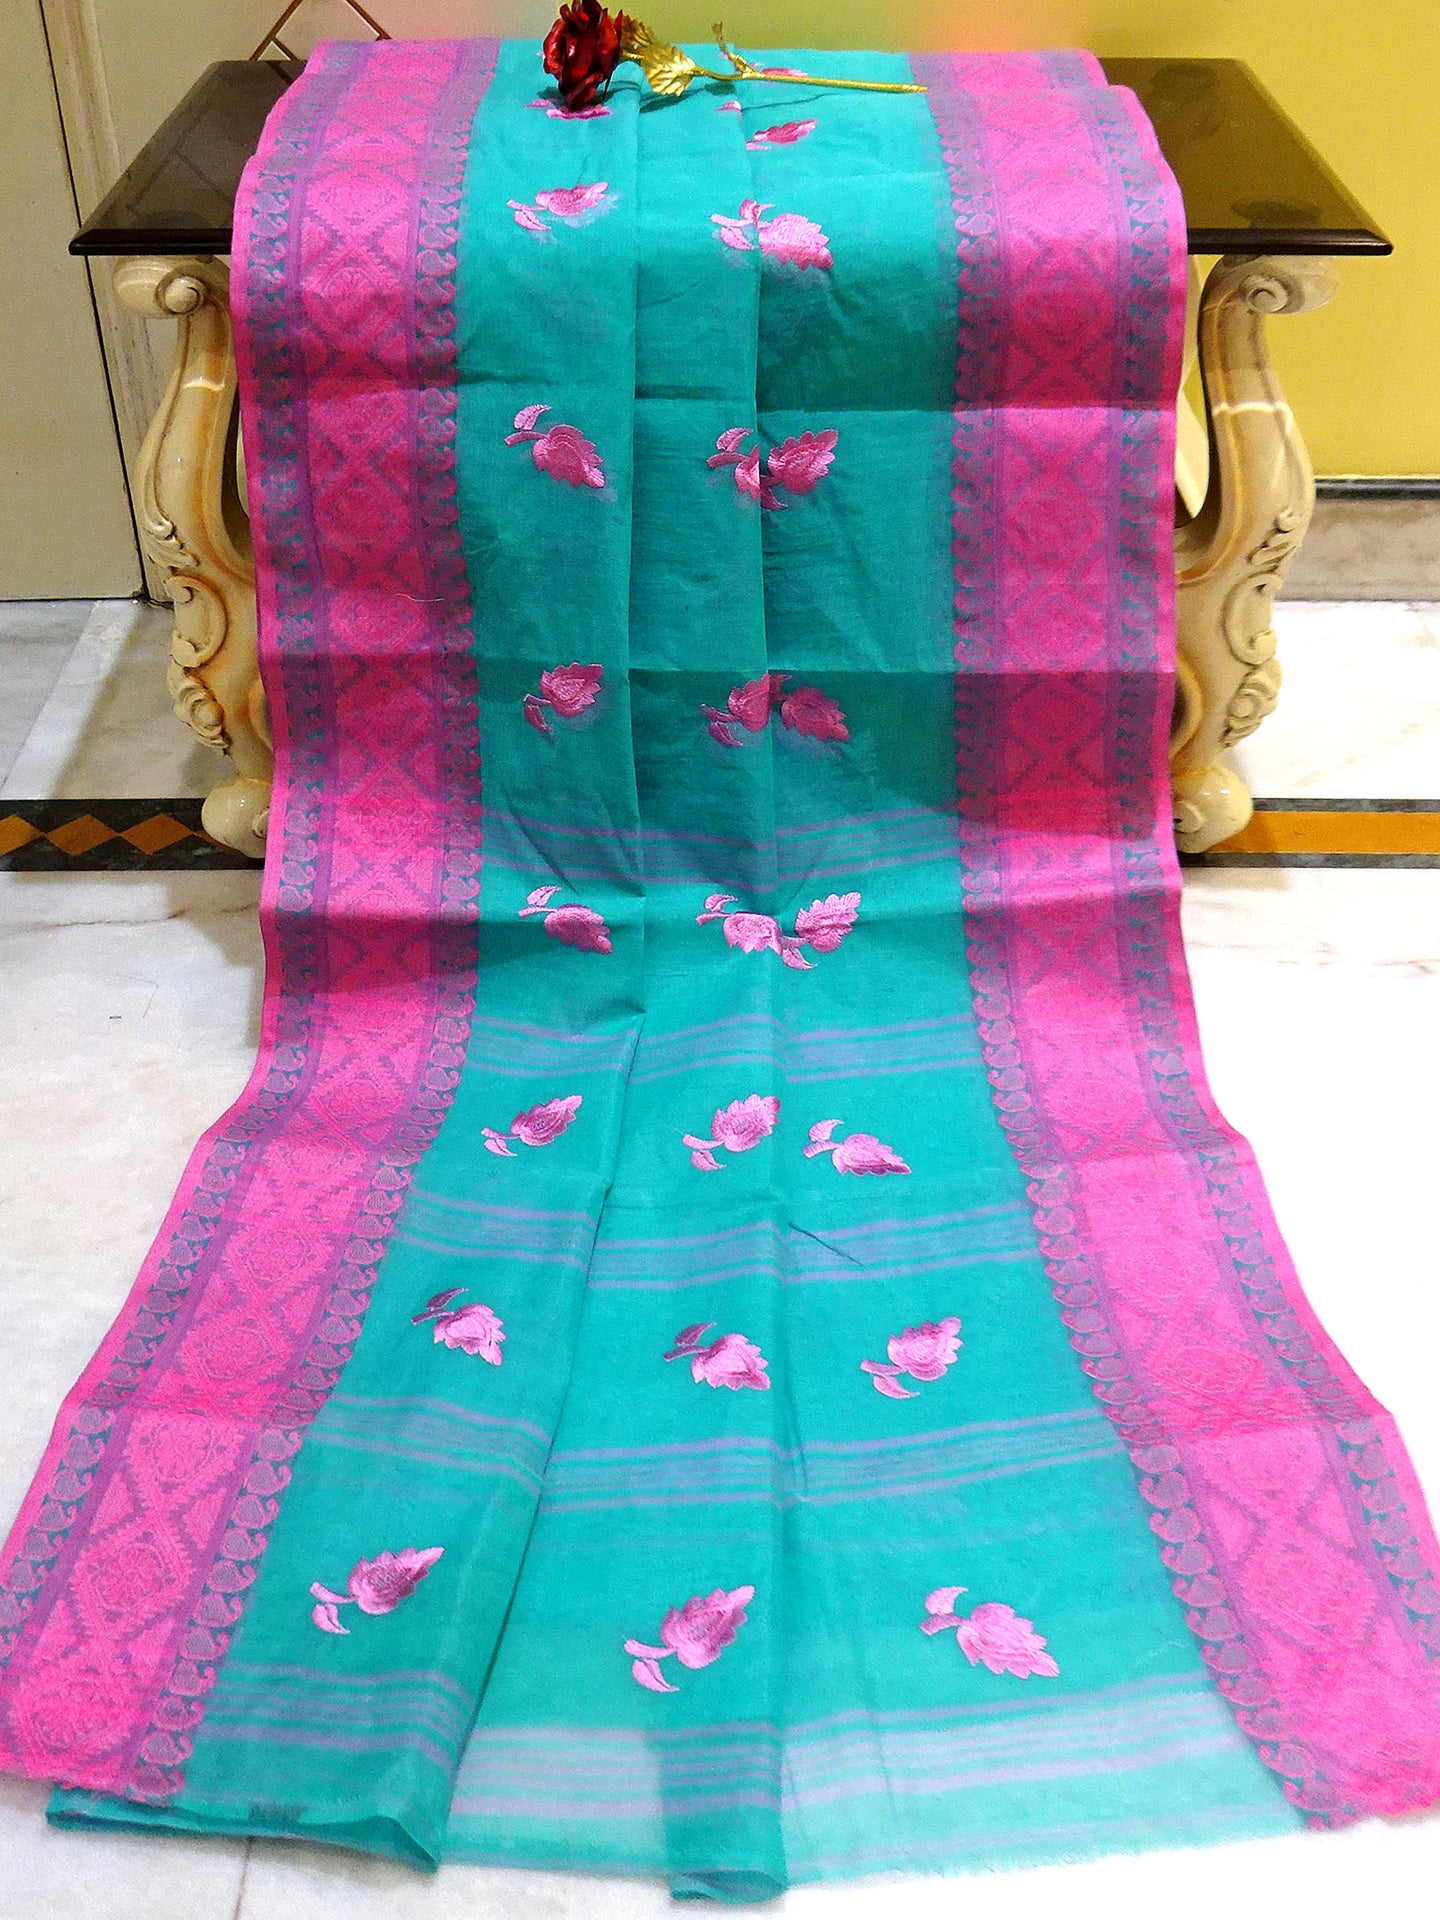 Bengal Handloom Cotton Saree with Leaf Motif Embroidery Work in Turquoise and Taffy Pink